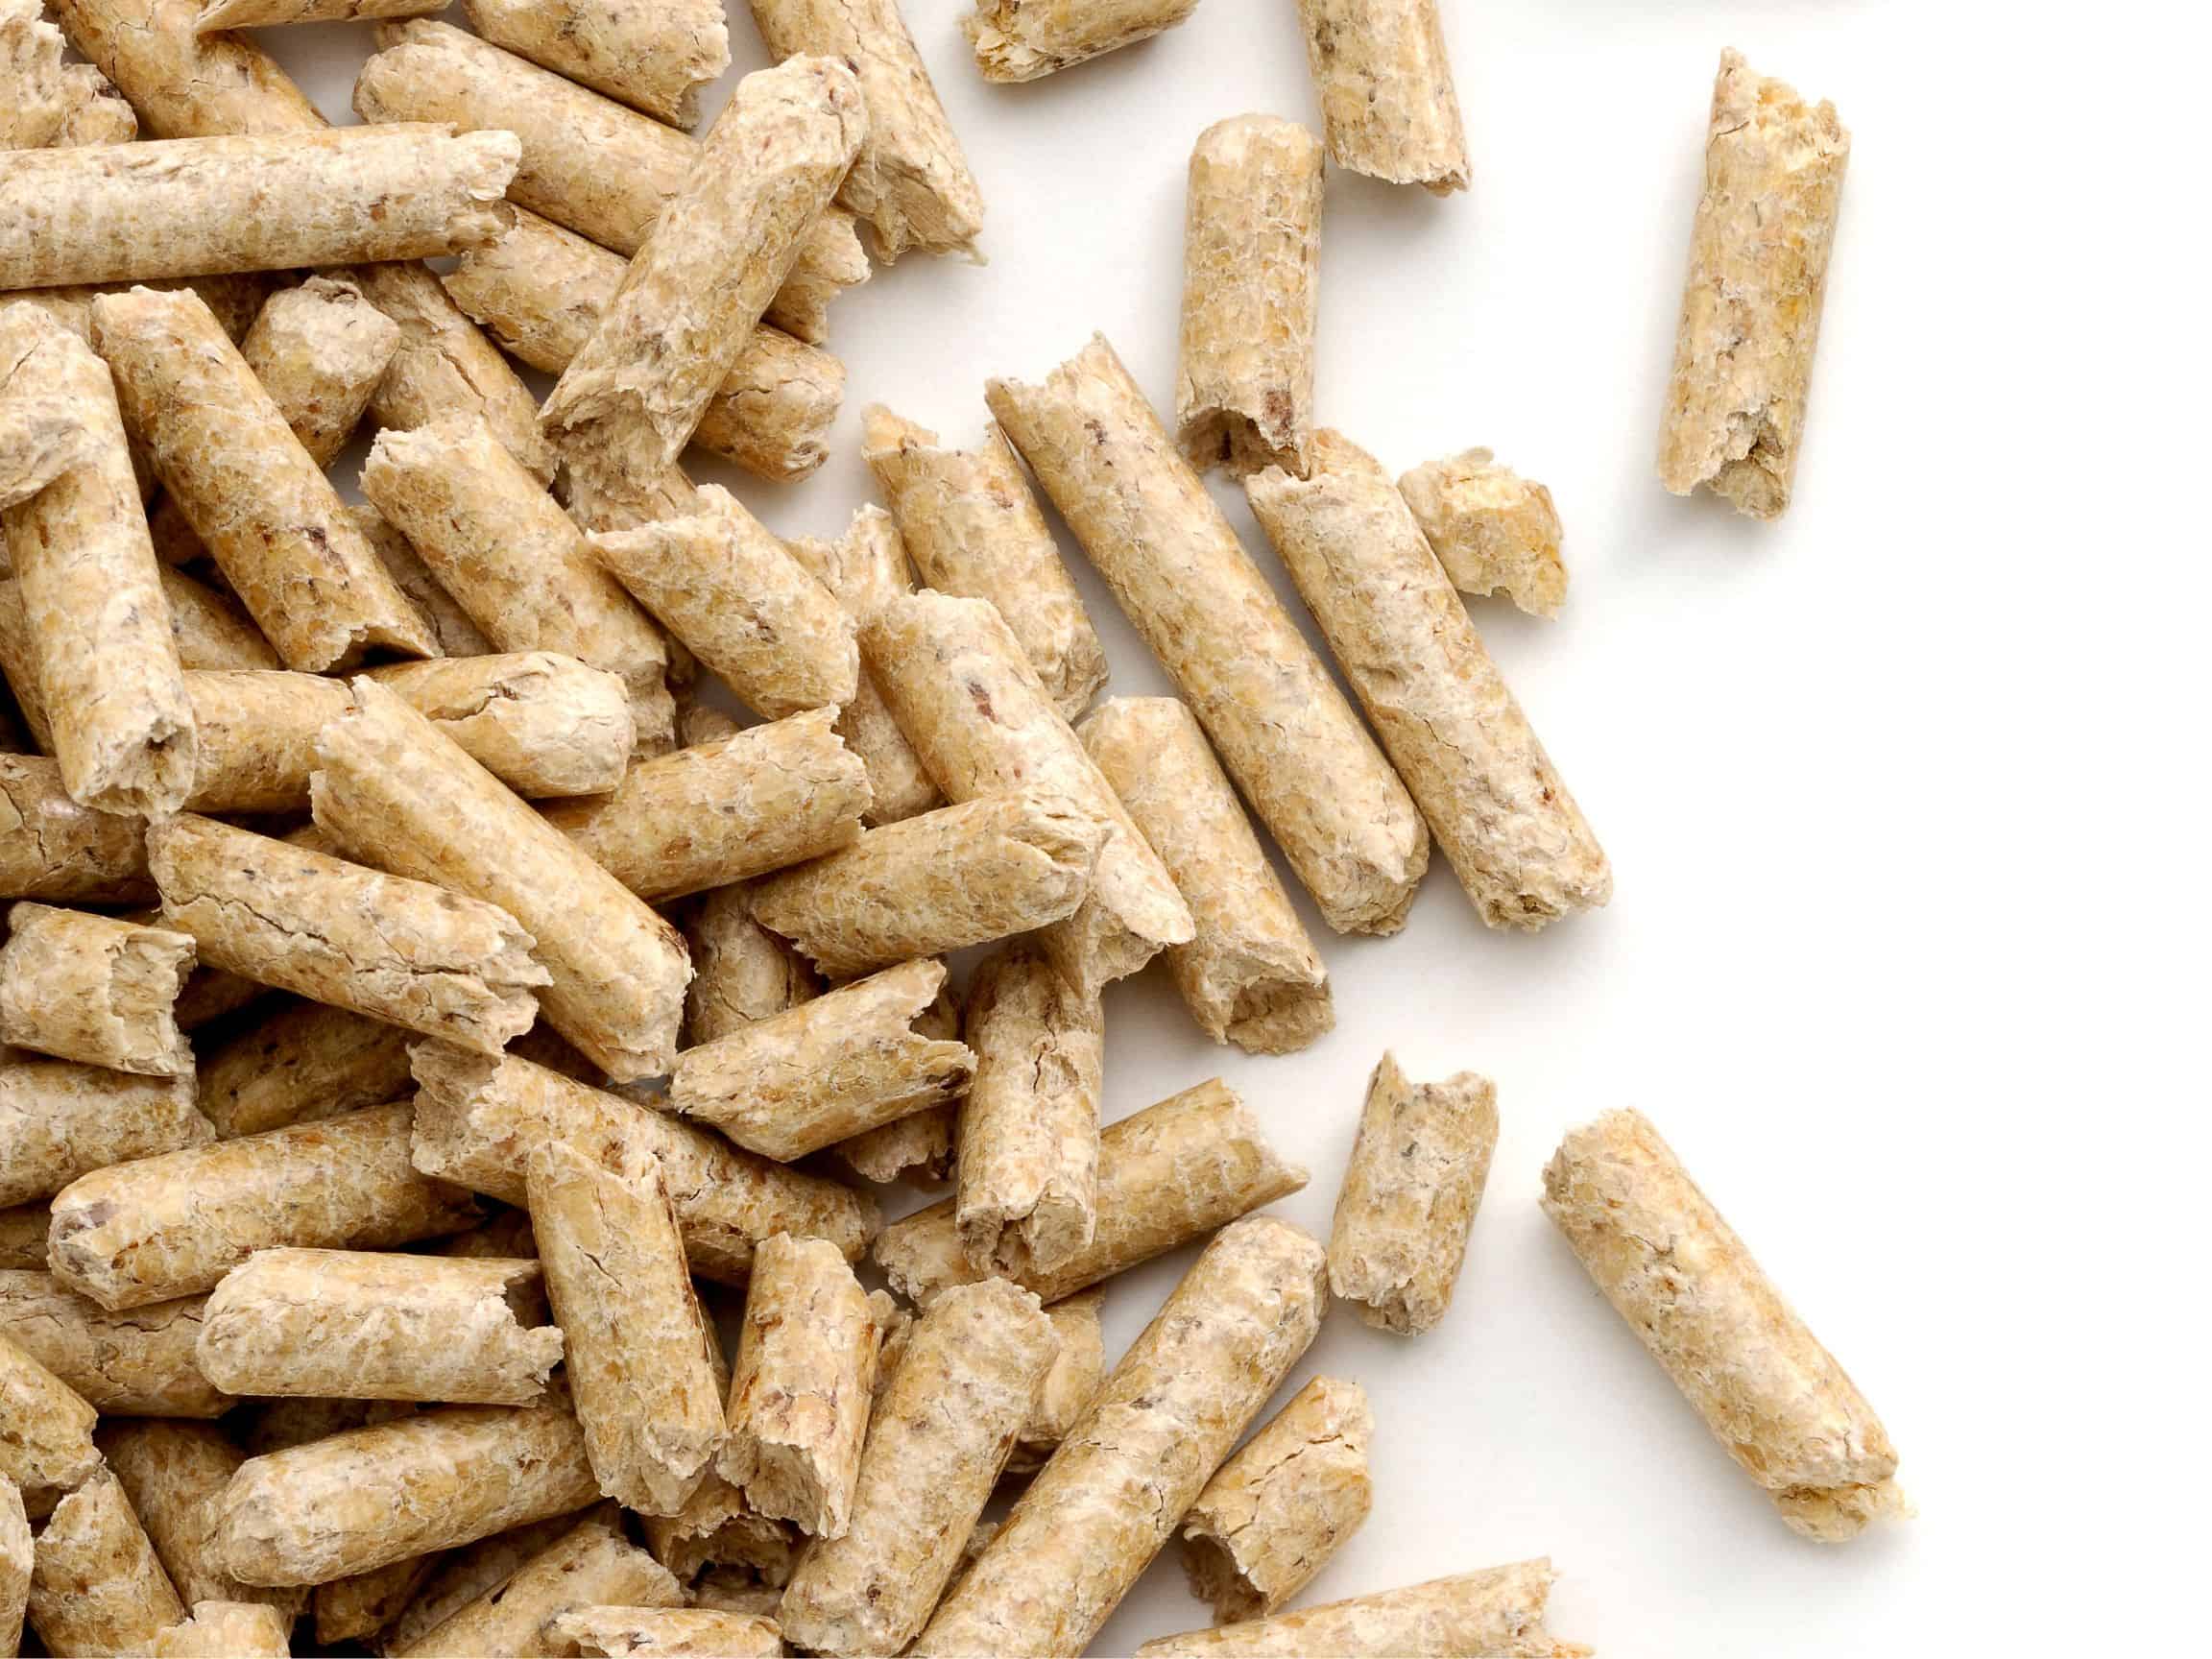 Wood pellets for a pellet smoker on a white backdrop.